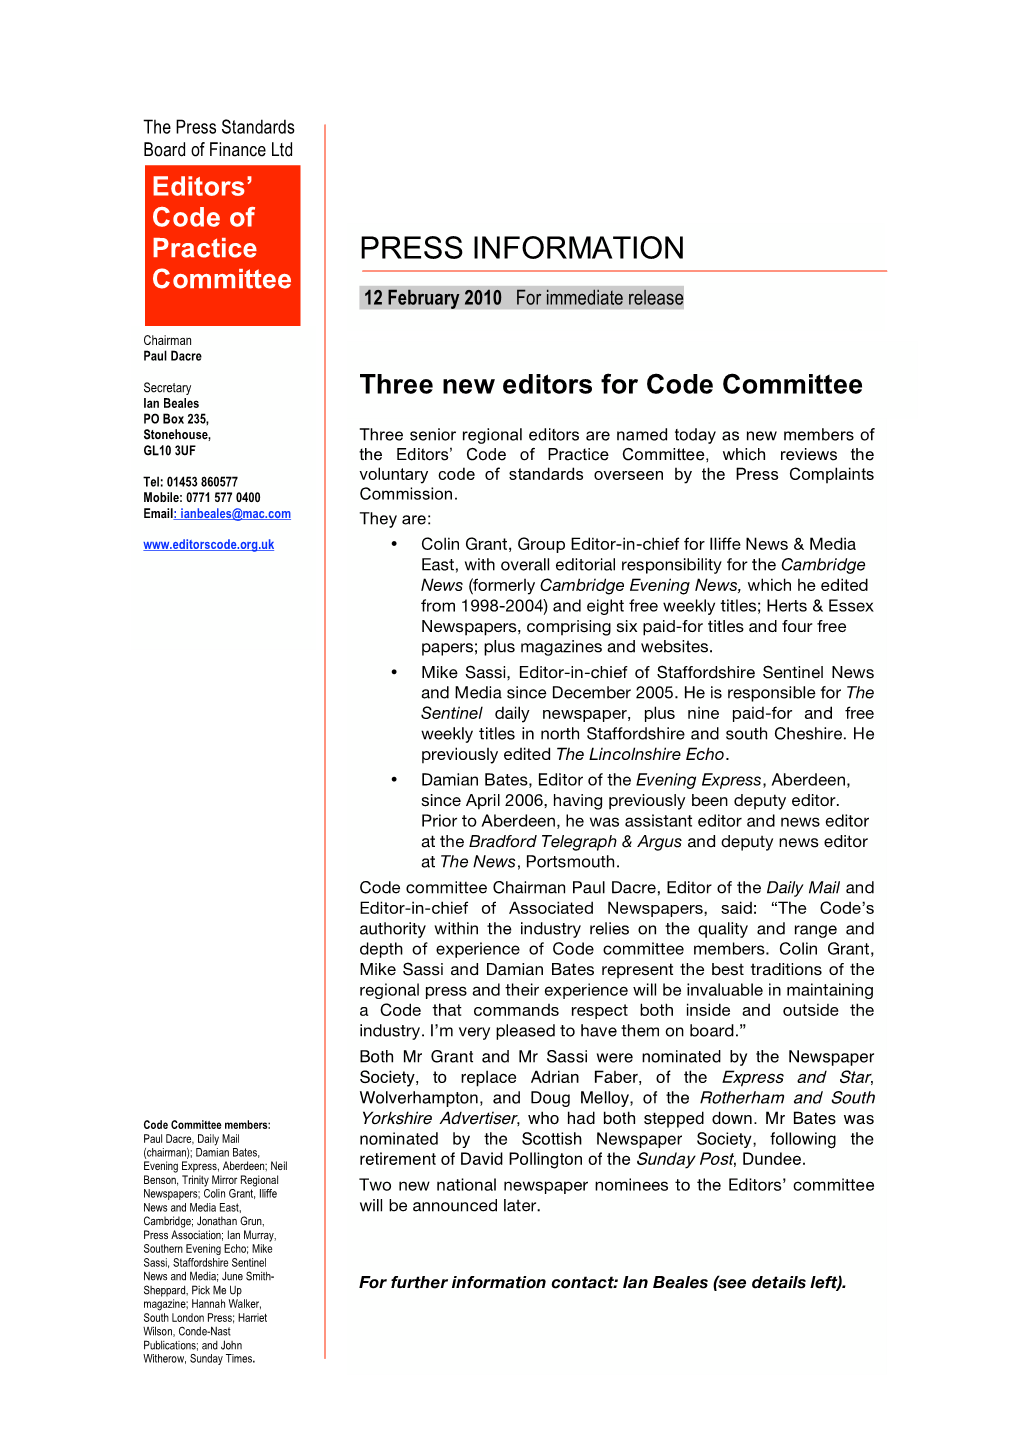 Three New Editors for Code Committee Named